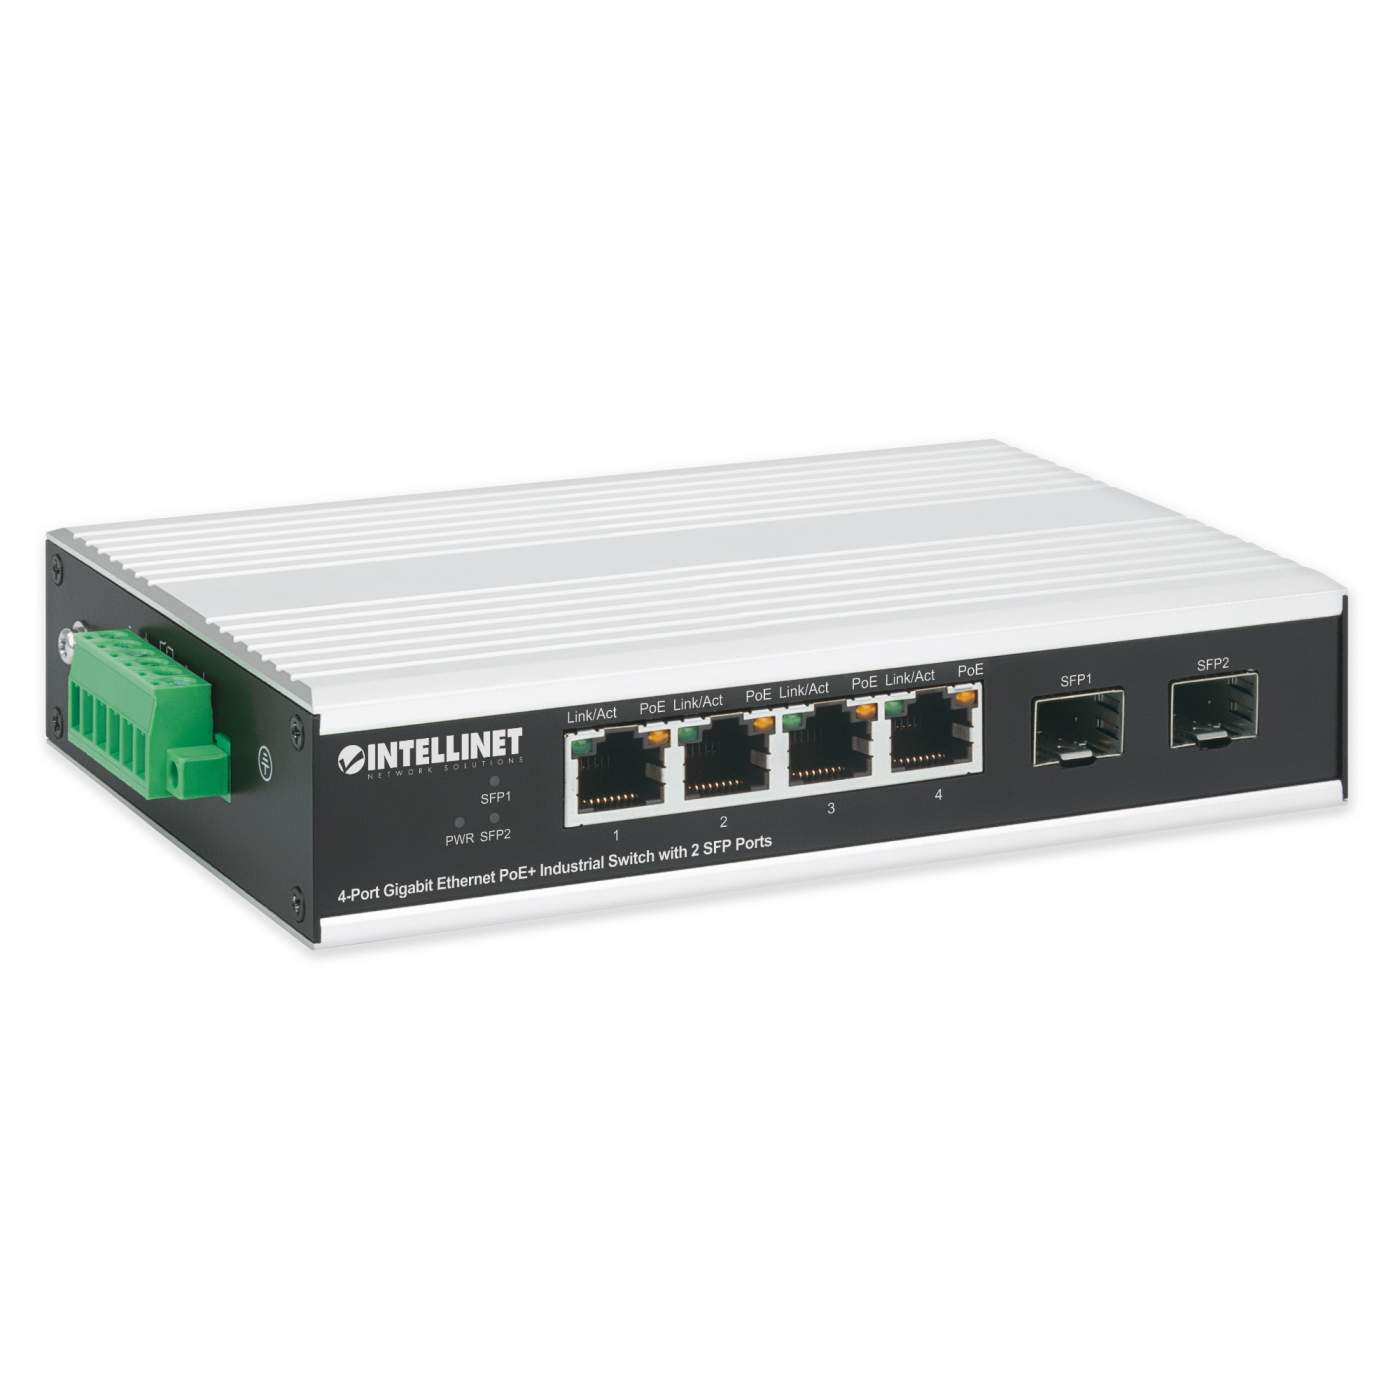 Industrial 4-Port Gigabit Ethernet PoE+ Switch with 2 SFP Ports Image 3